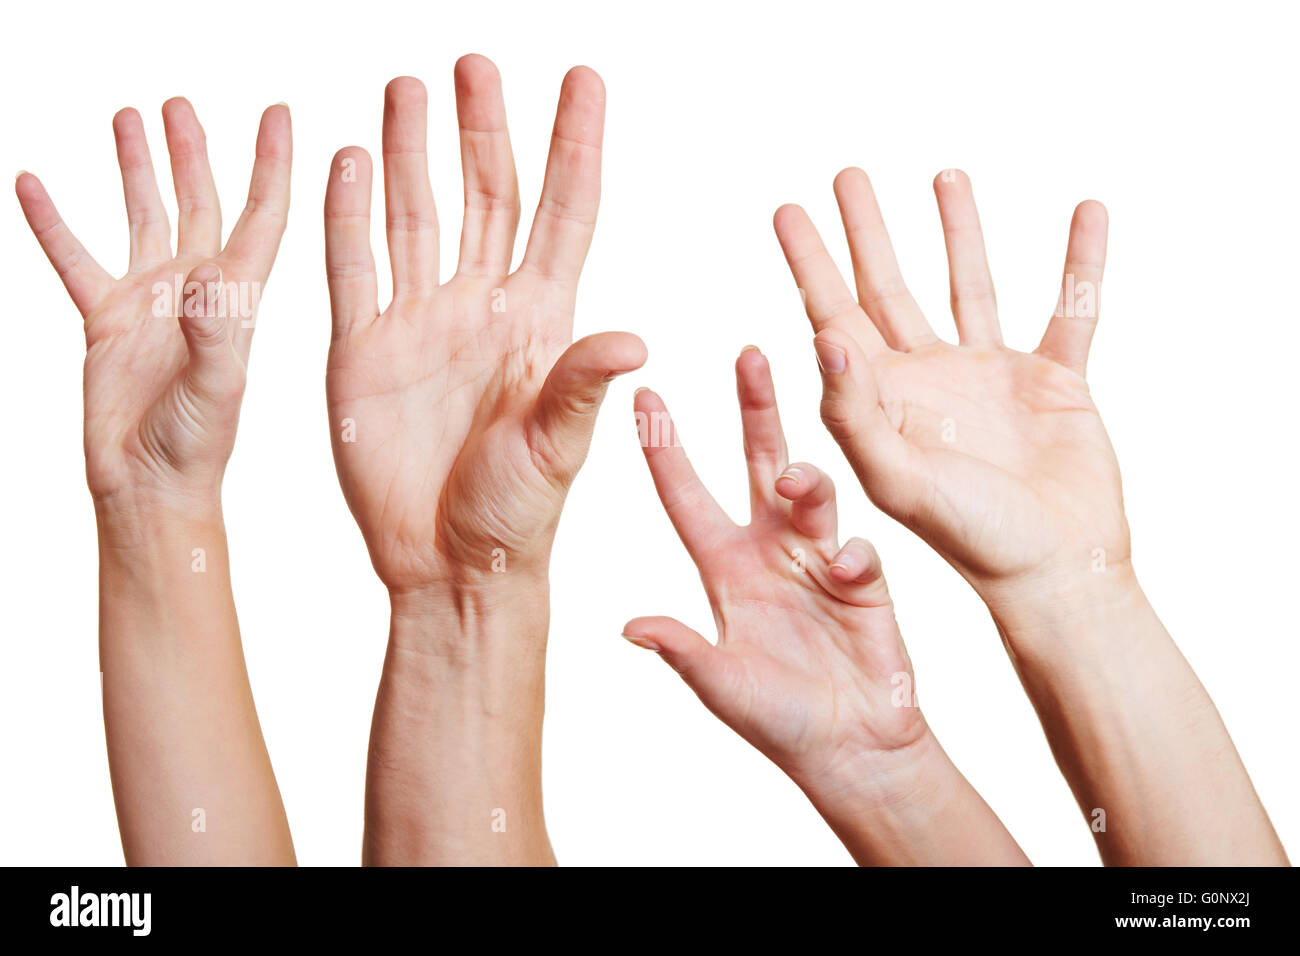 Many hands reaching out in the air for help Stock Photo